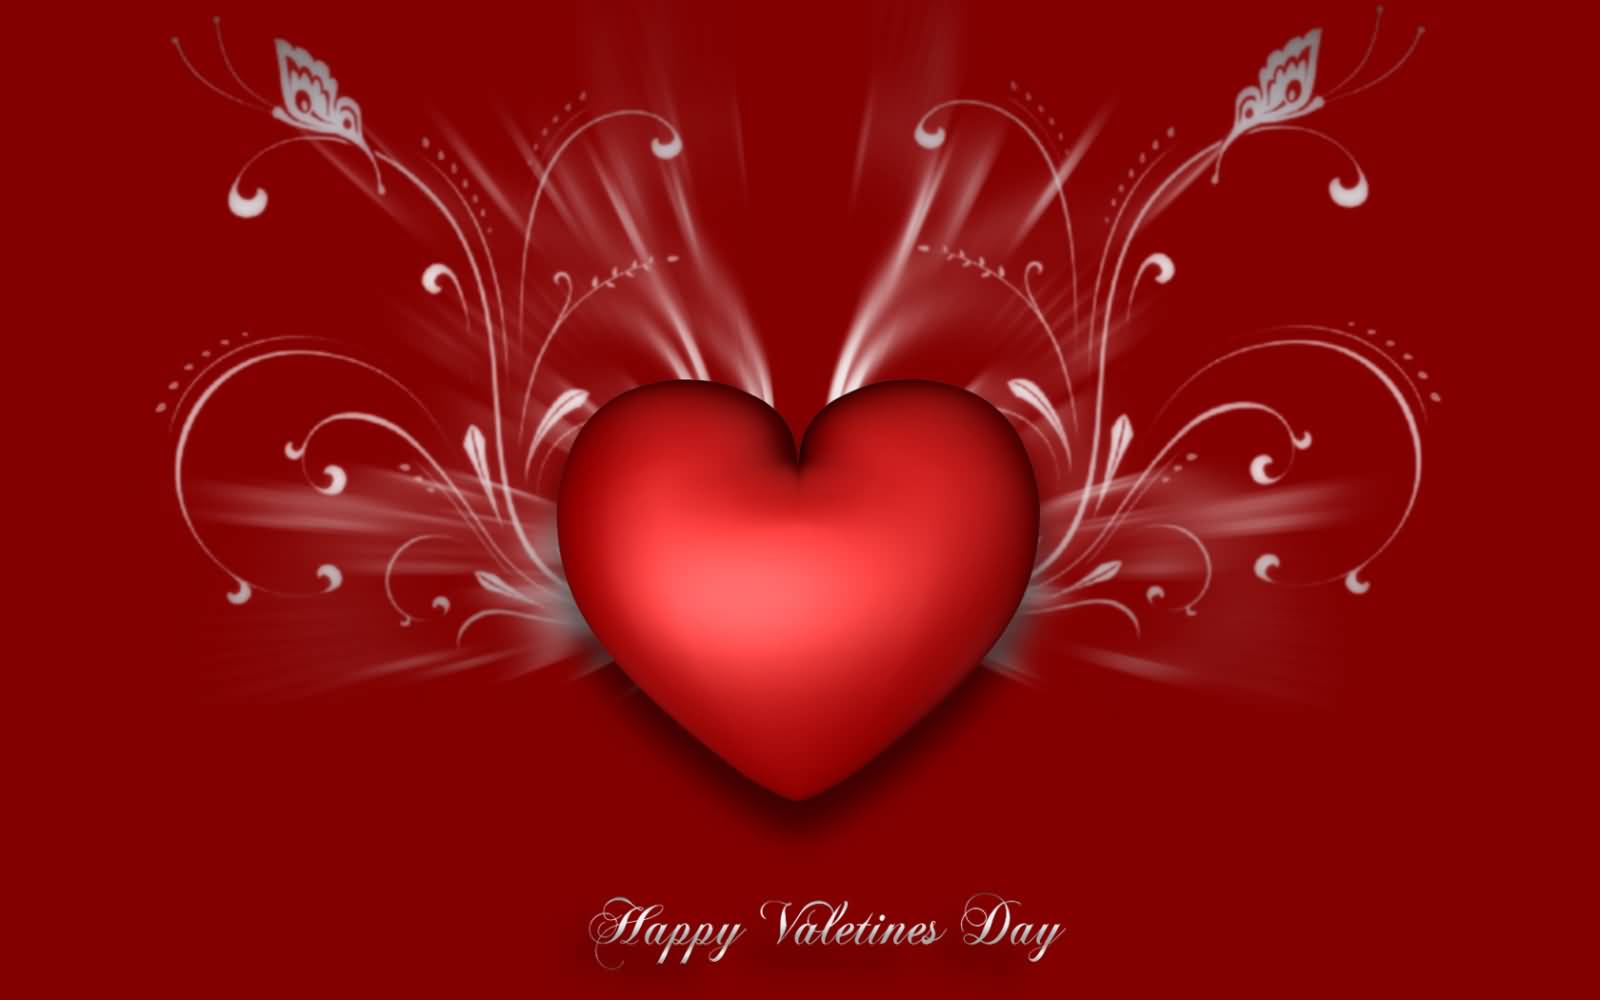 Happy Valentine’s Day Red Heart HD Wallpaper